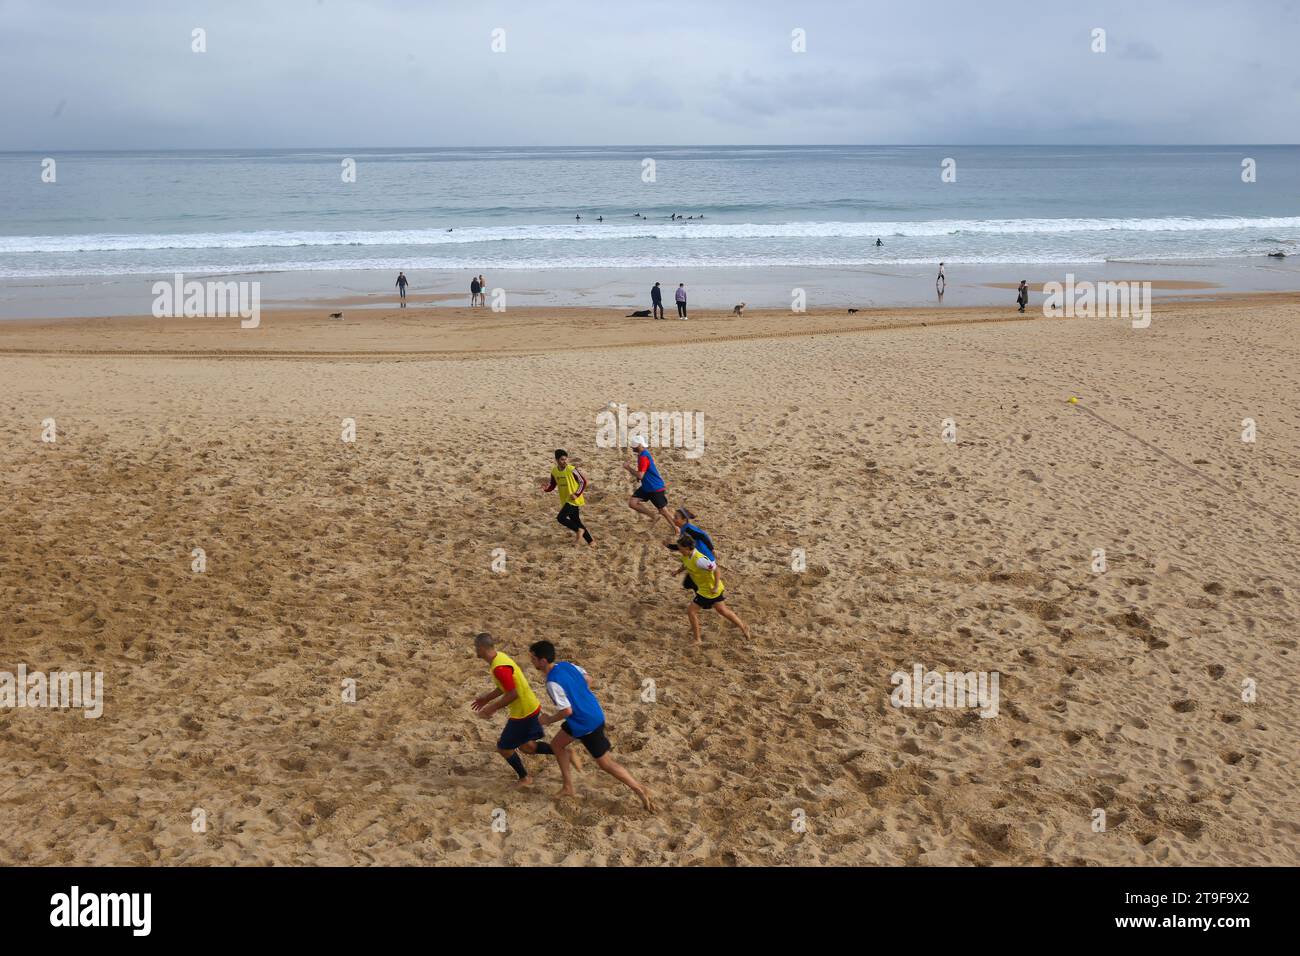 Santander, Spain, November 25, 2023: Several people playing Frisbee during Daily Life in Santander, on November 25, 2023, in Santander, Spain. Credit: Alberto Brevers / Alamy Live News. Stock Photo